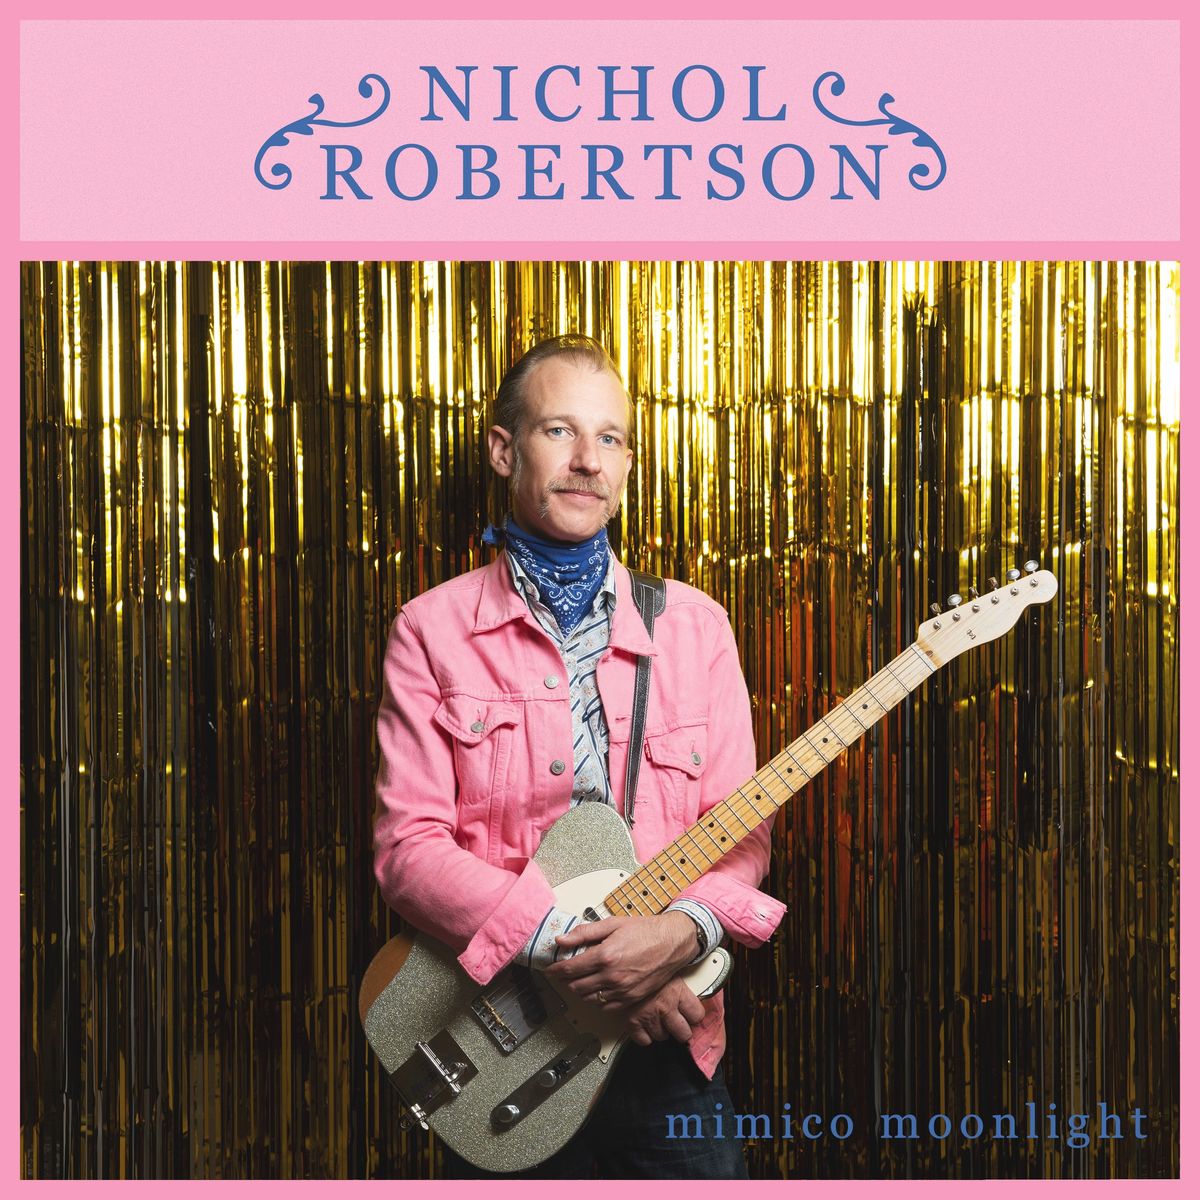 Nichol Robertson's Mimico Moonlight Vinyl Release (with special guest Jackie Pirico